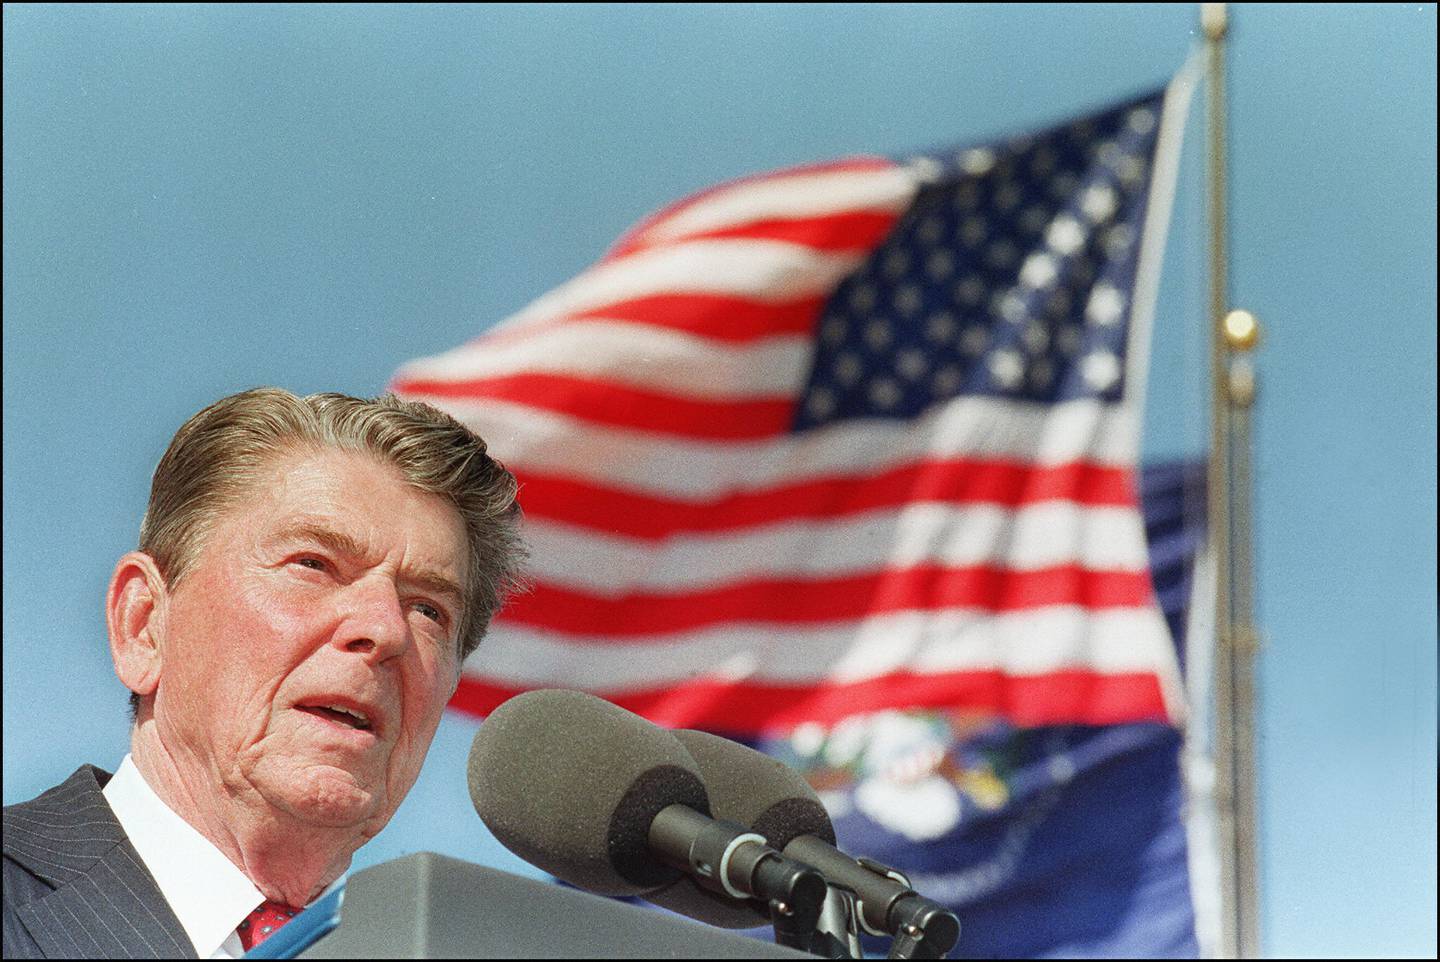 (Files) This November 4, 1991 file photo shows US President Ronald Reagan giving a speech at the opening of the library that bears his name in Simi Valley, California.  Reagan broke his right hip late on January 12, 2001 after a fall at his home.  He is listed in stable condition and will undergo surgery at St. John's Health Center in Santa Monica, California, on January 13.  Reagan will turn 90 on February 6.  He was President of the United States from 1981 to 1989 and retired from public life after it was discovered that he was suffering from Alzheimer's disease.  AFP-J image files.  David Ack